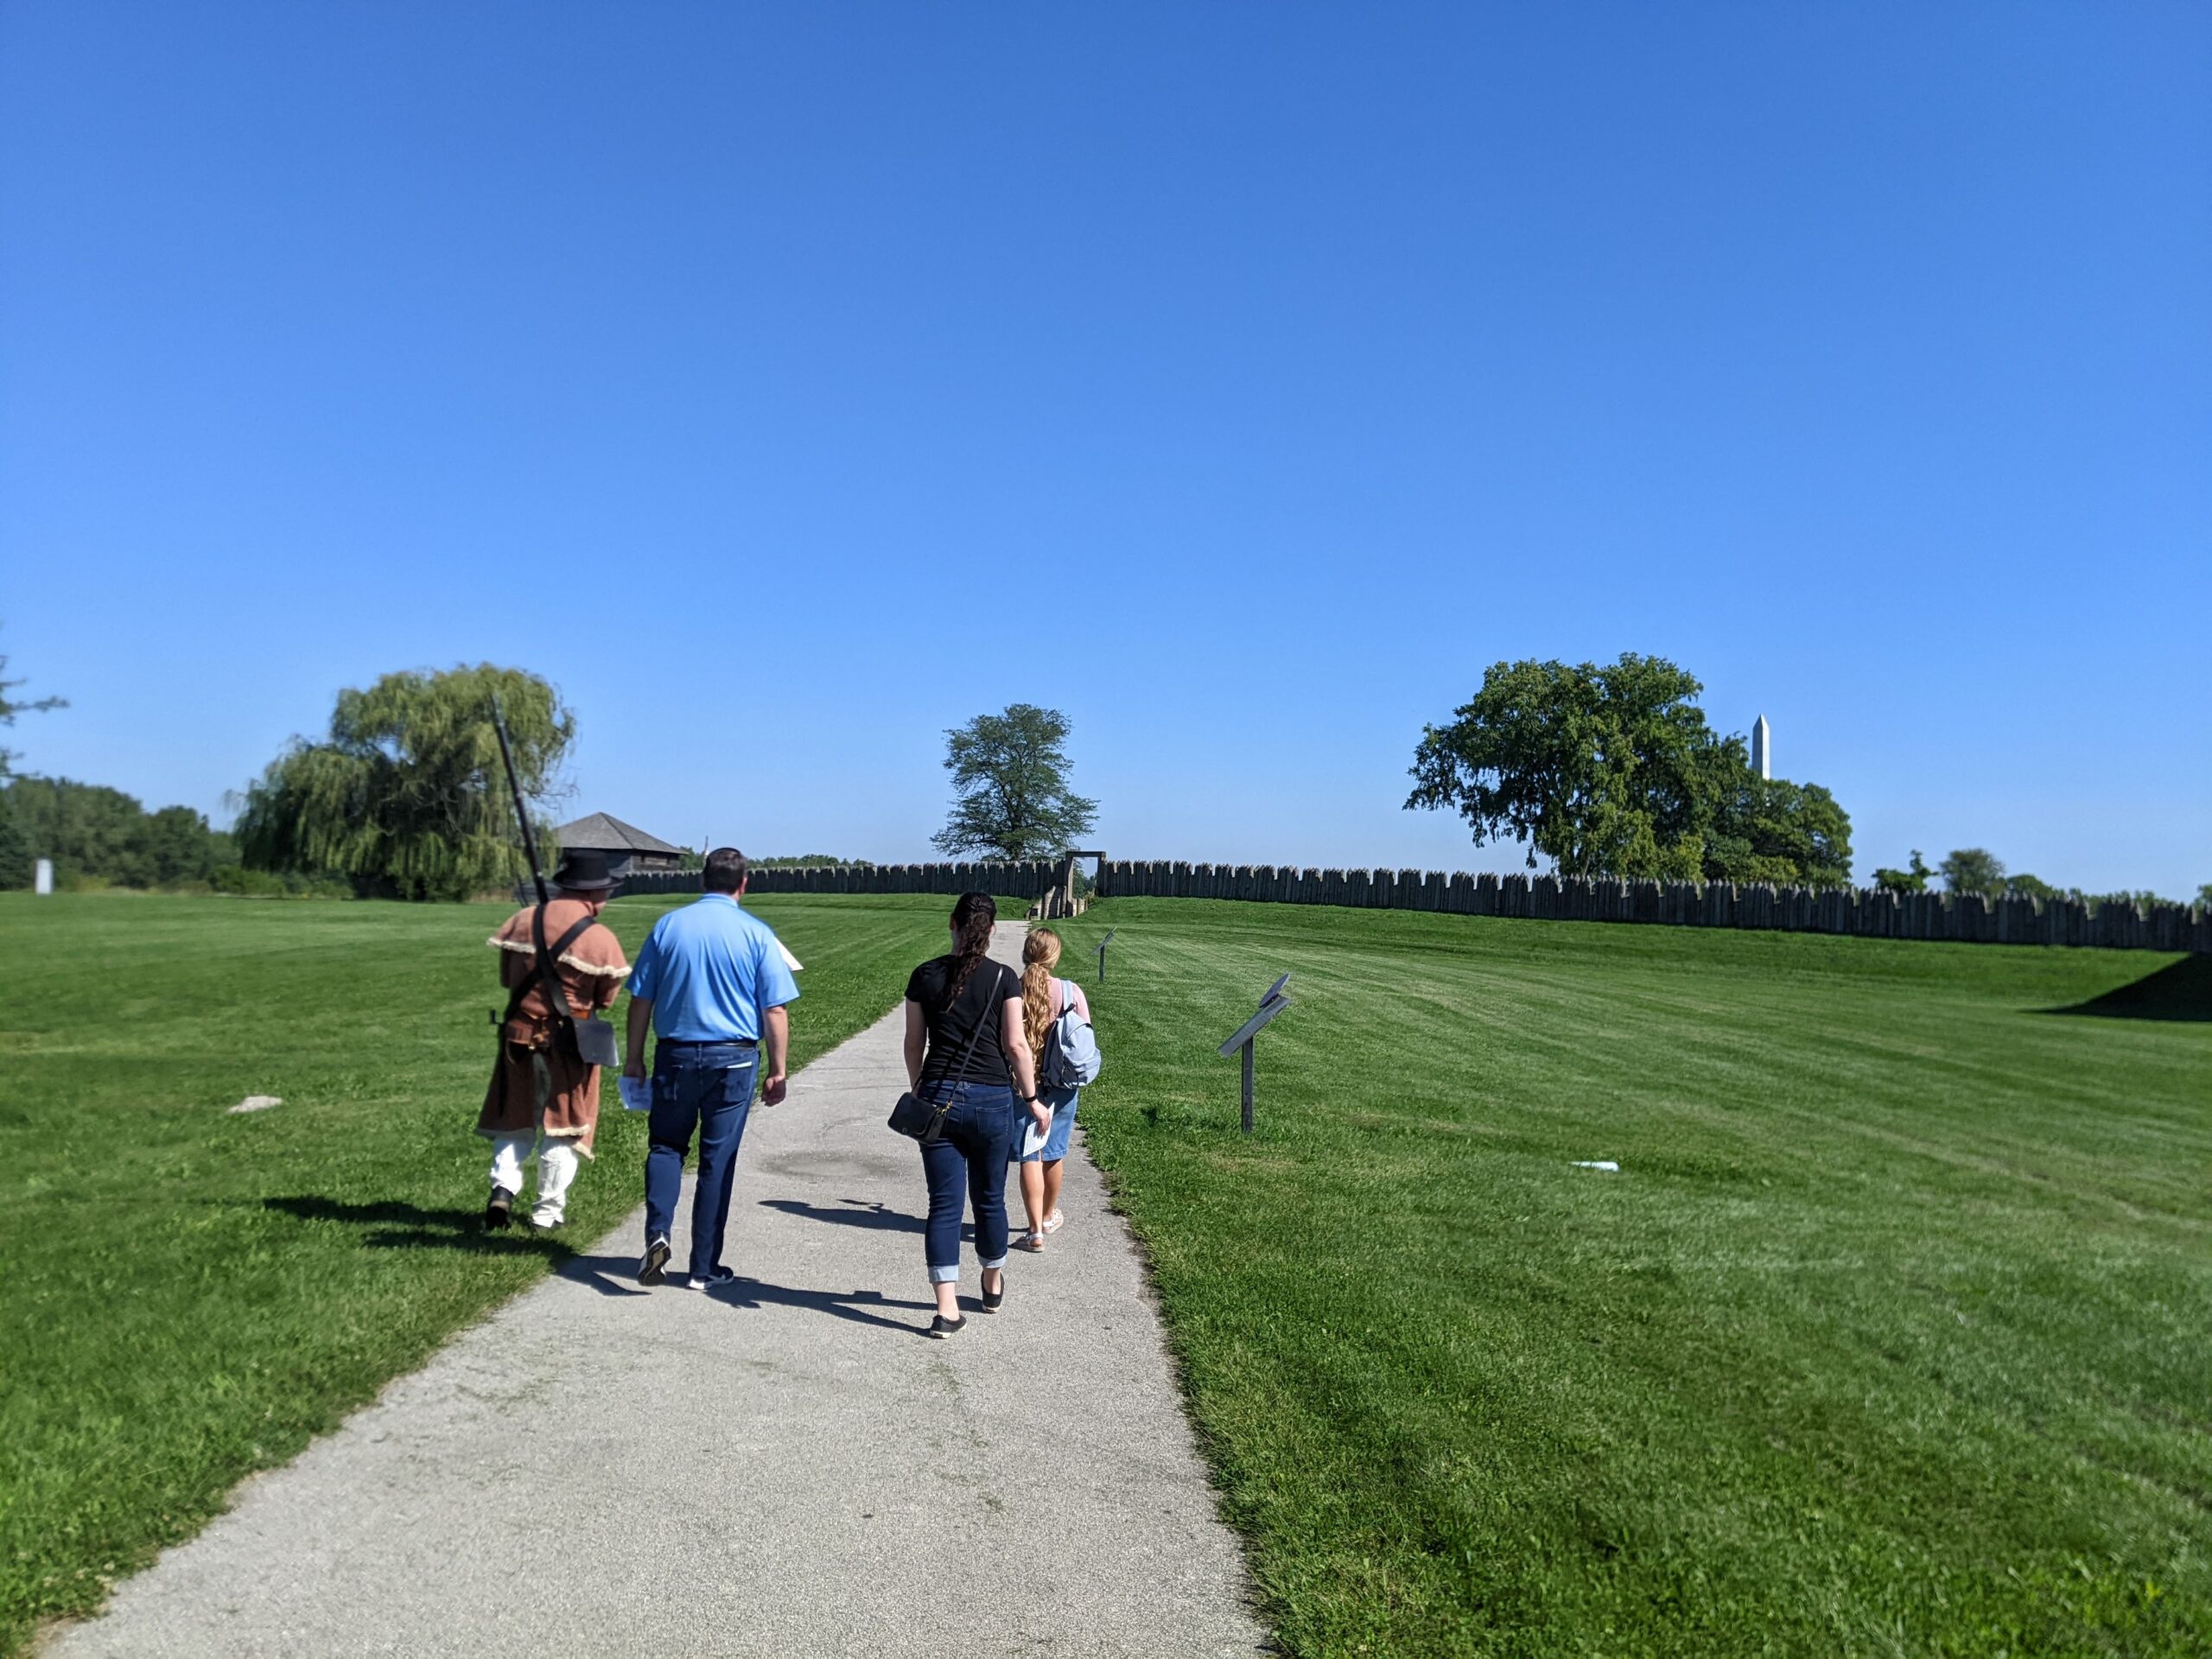 Four people on a paved path walking up to the wooden walls of Fort Meigs